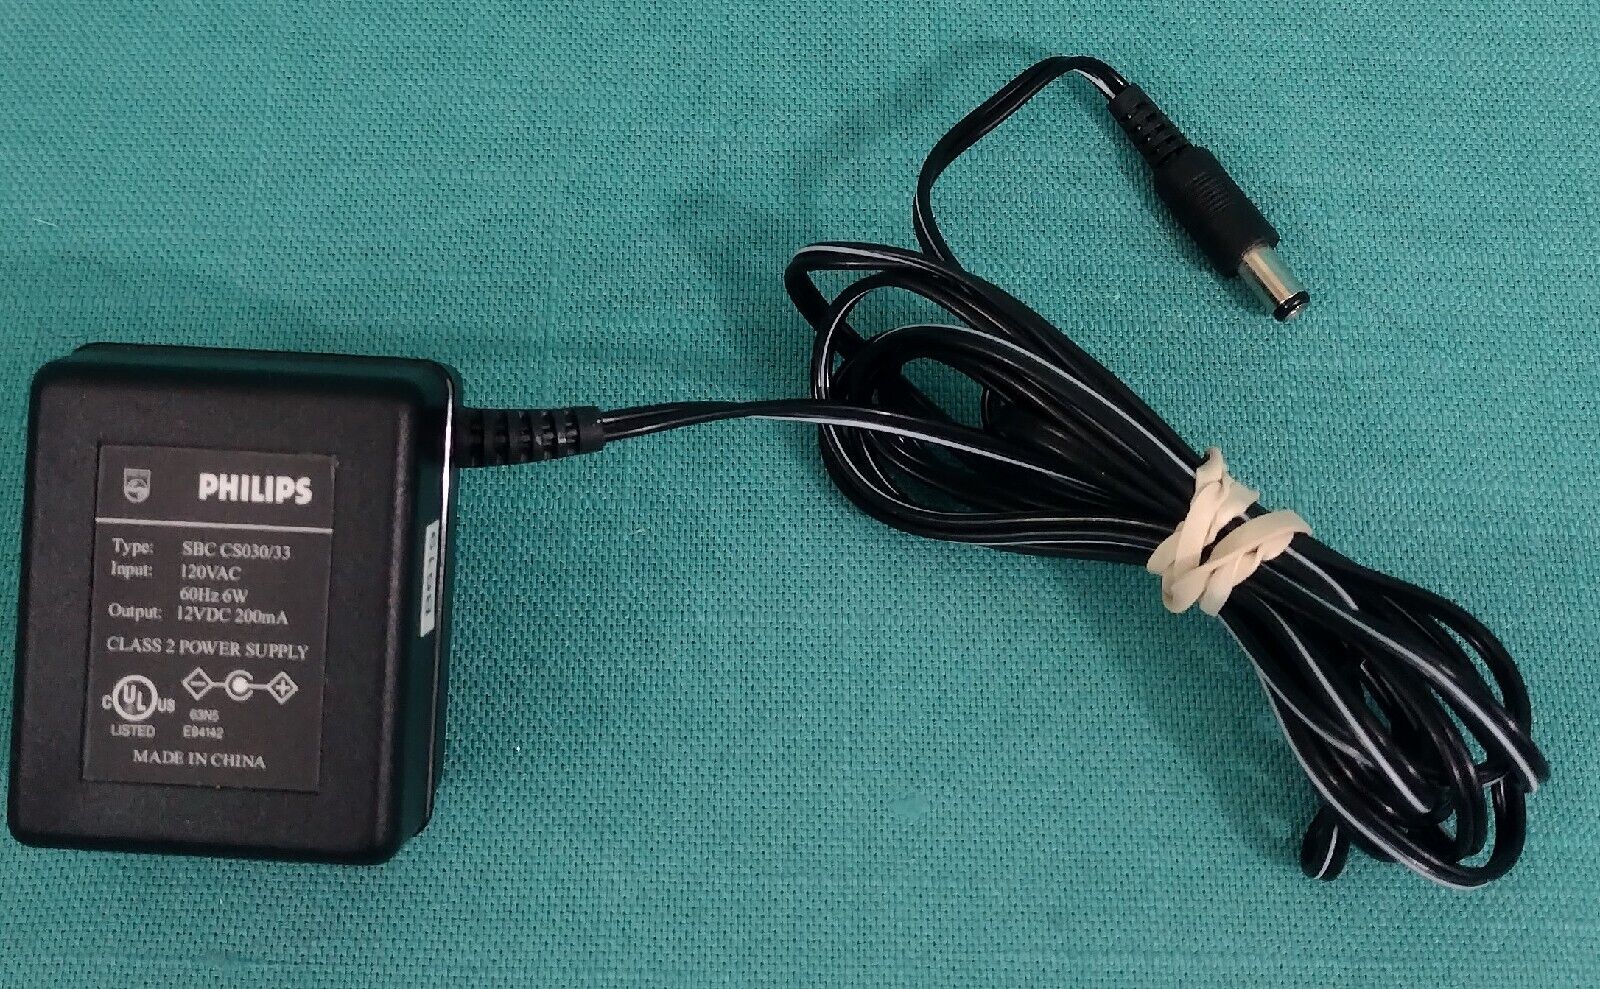 *Brand NEW* PHILIPS 12VDC 200mA AC/DC Adapter SBC SC030/33 Input 120VAC Output Power Supply